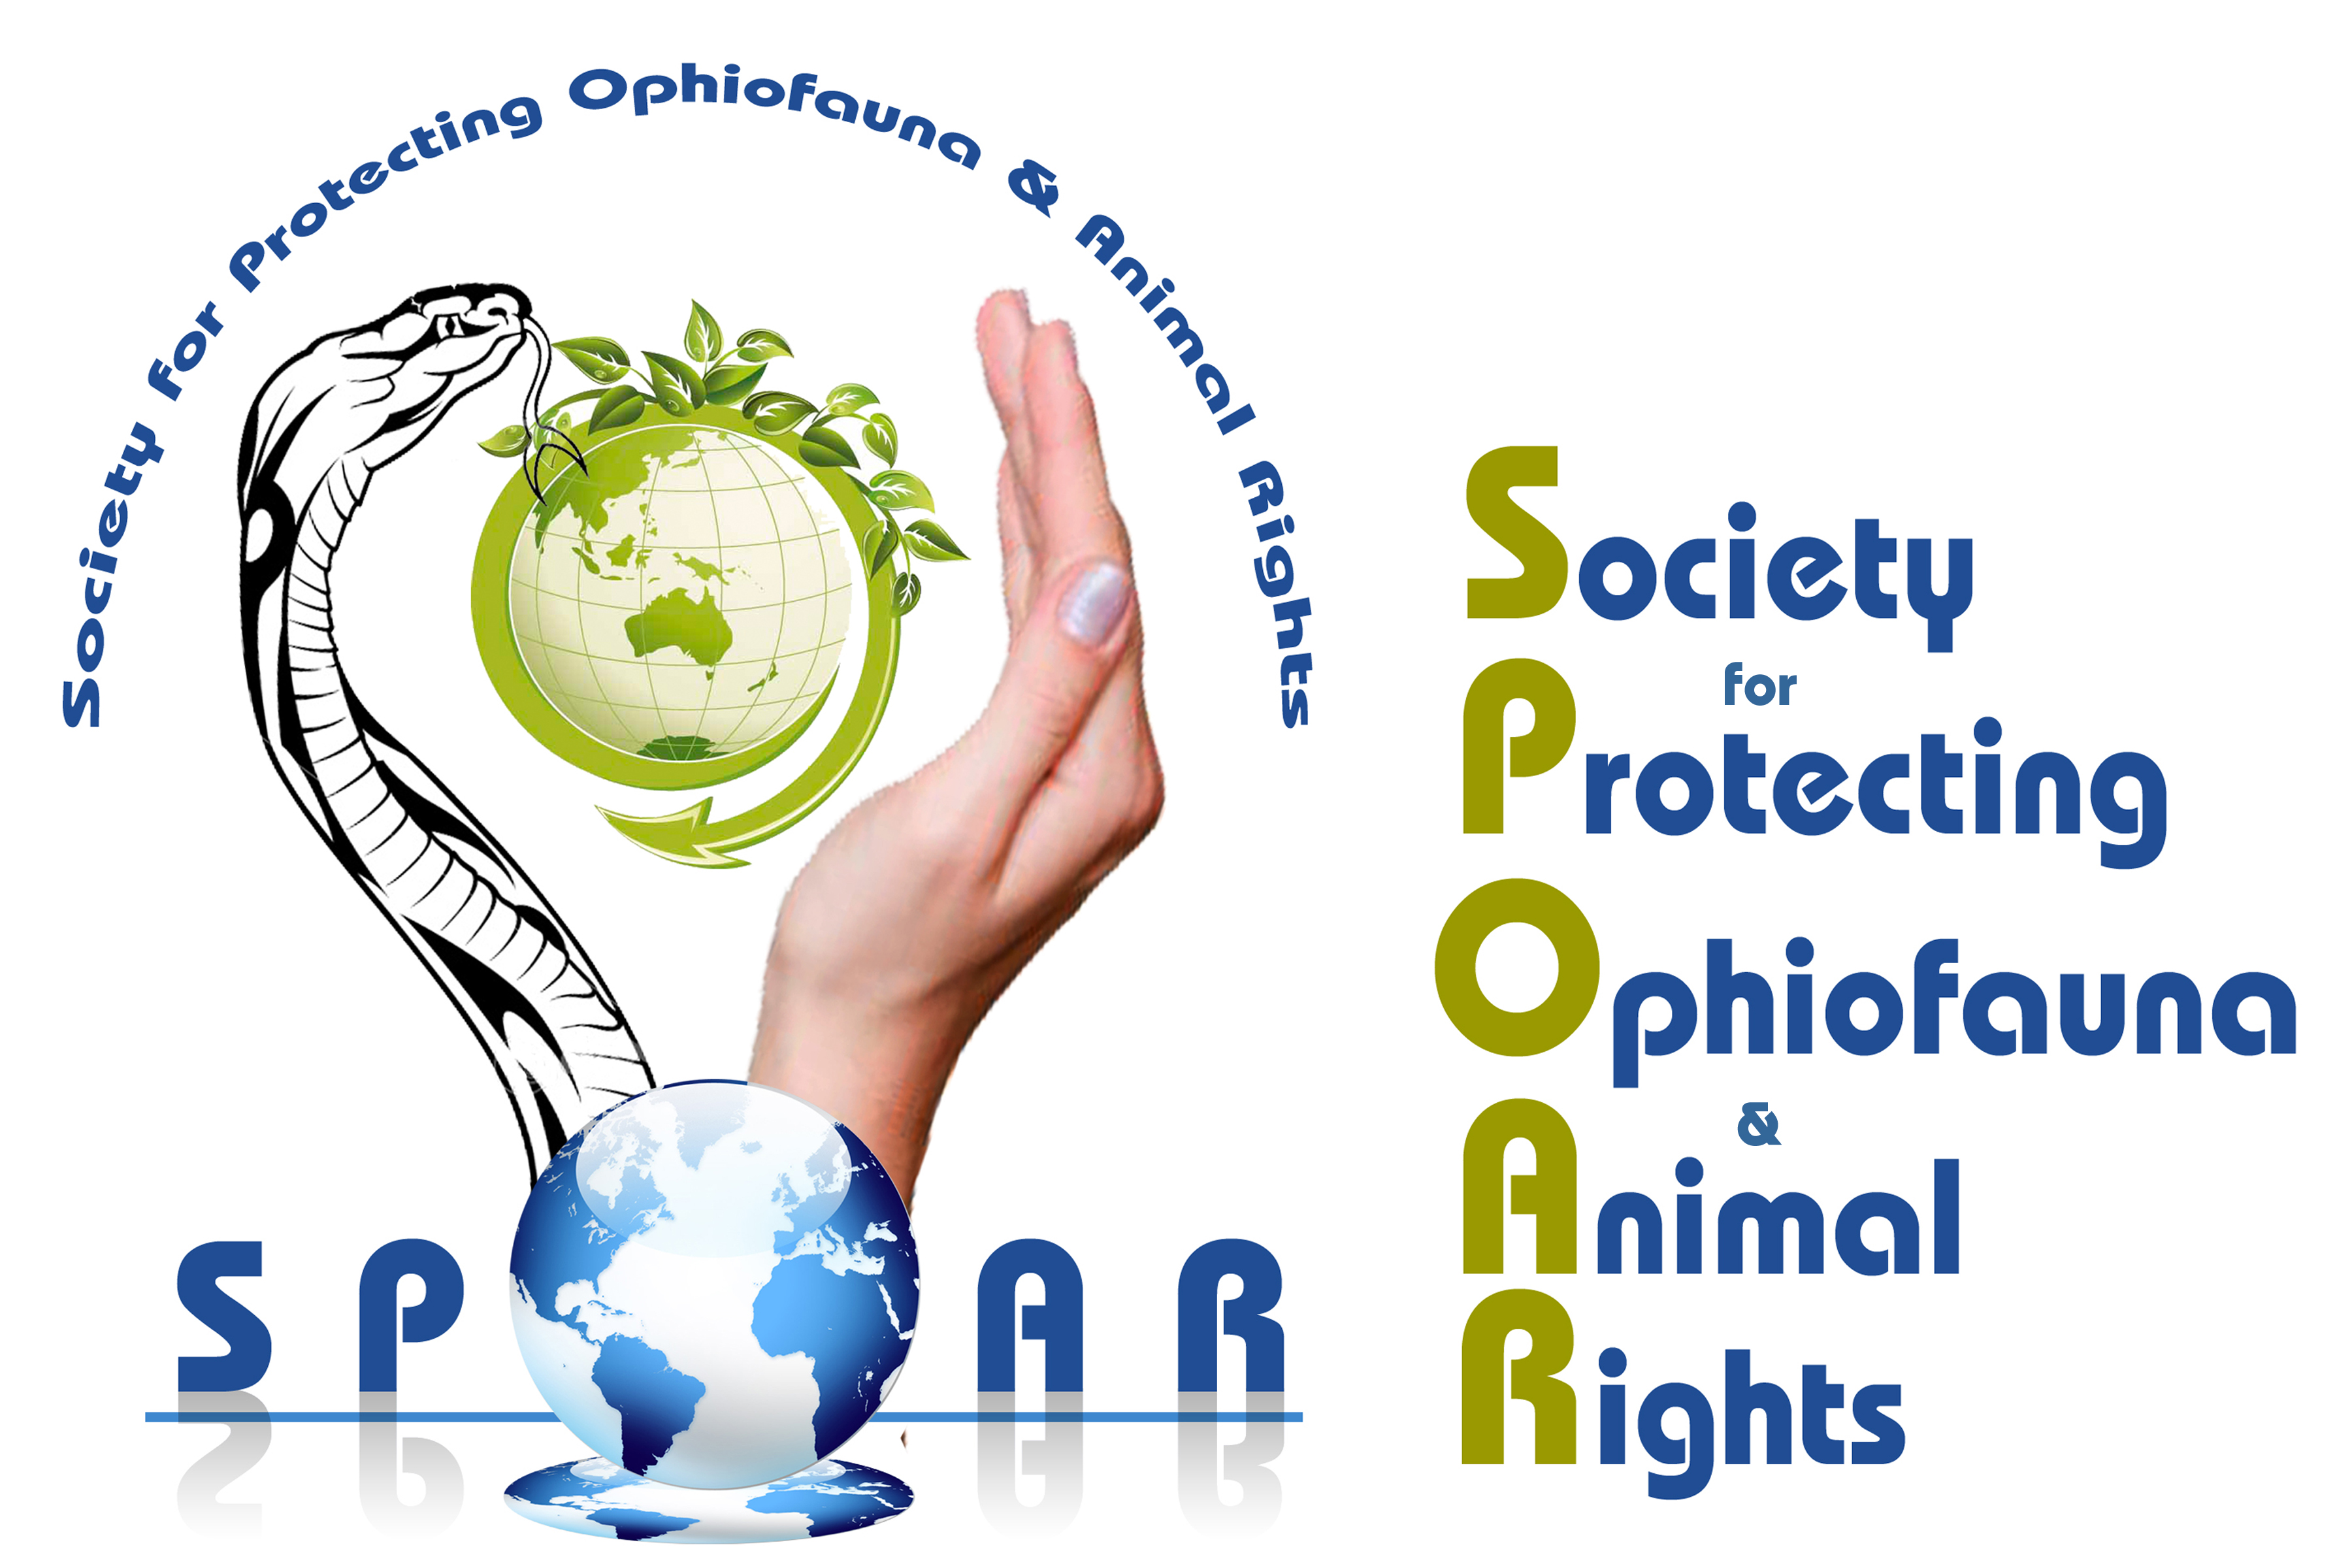 SPOAR (Society for Protecting Ophiofauna & Animal Rights)